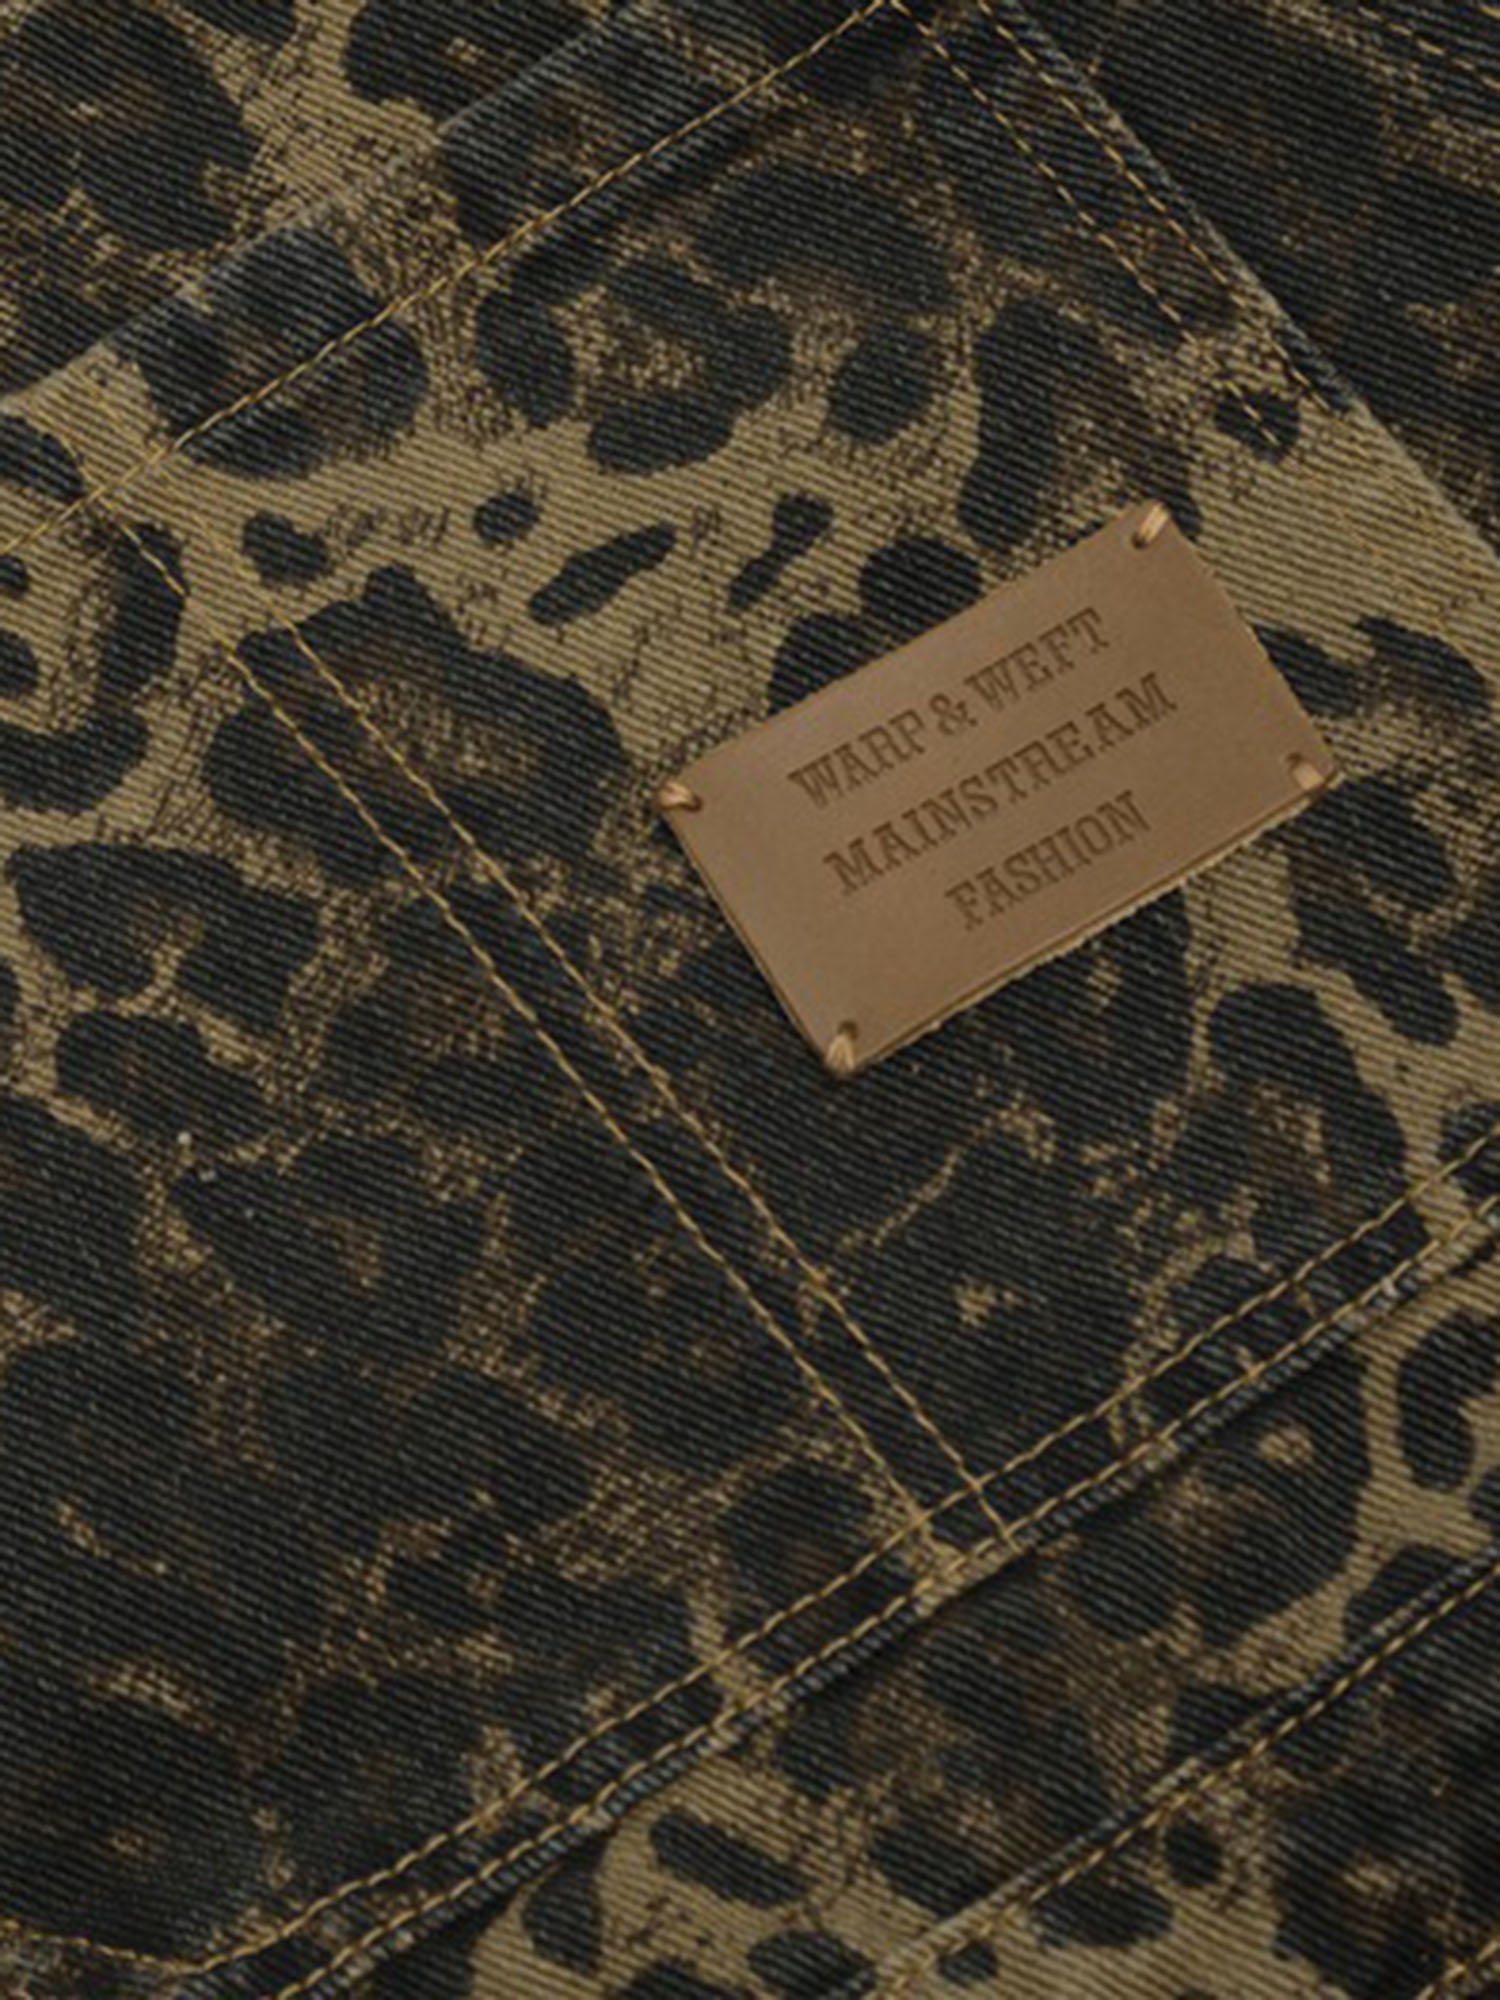 Thesupermade Street Personality Workwear Leopard Overalls